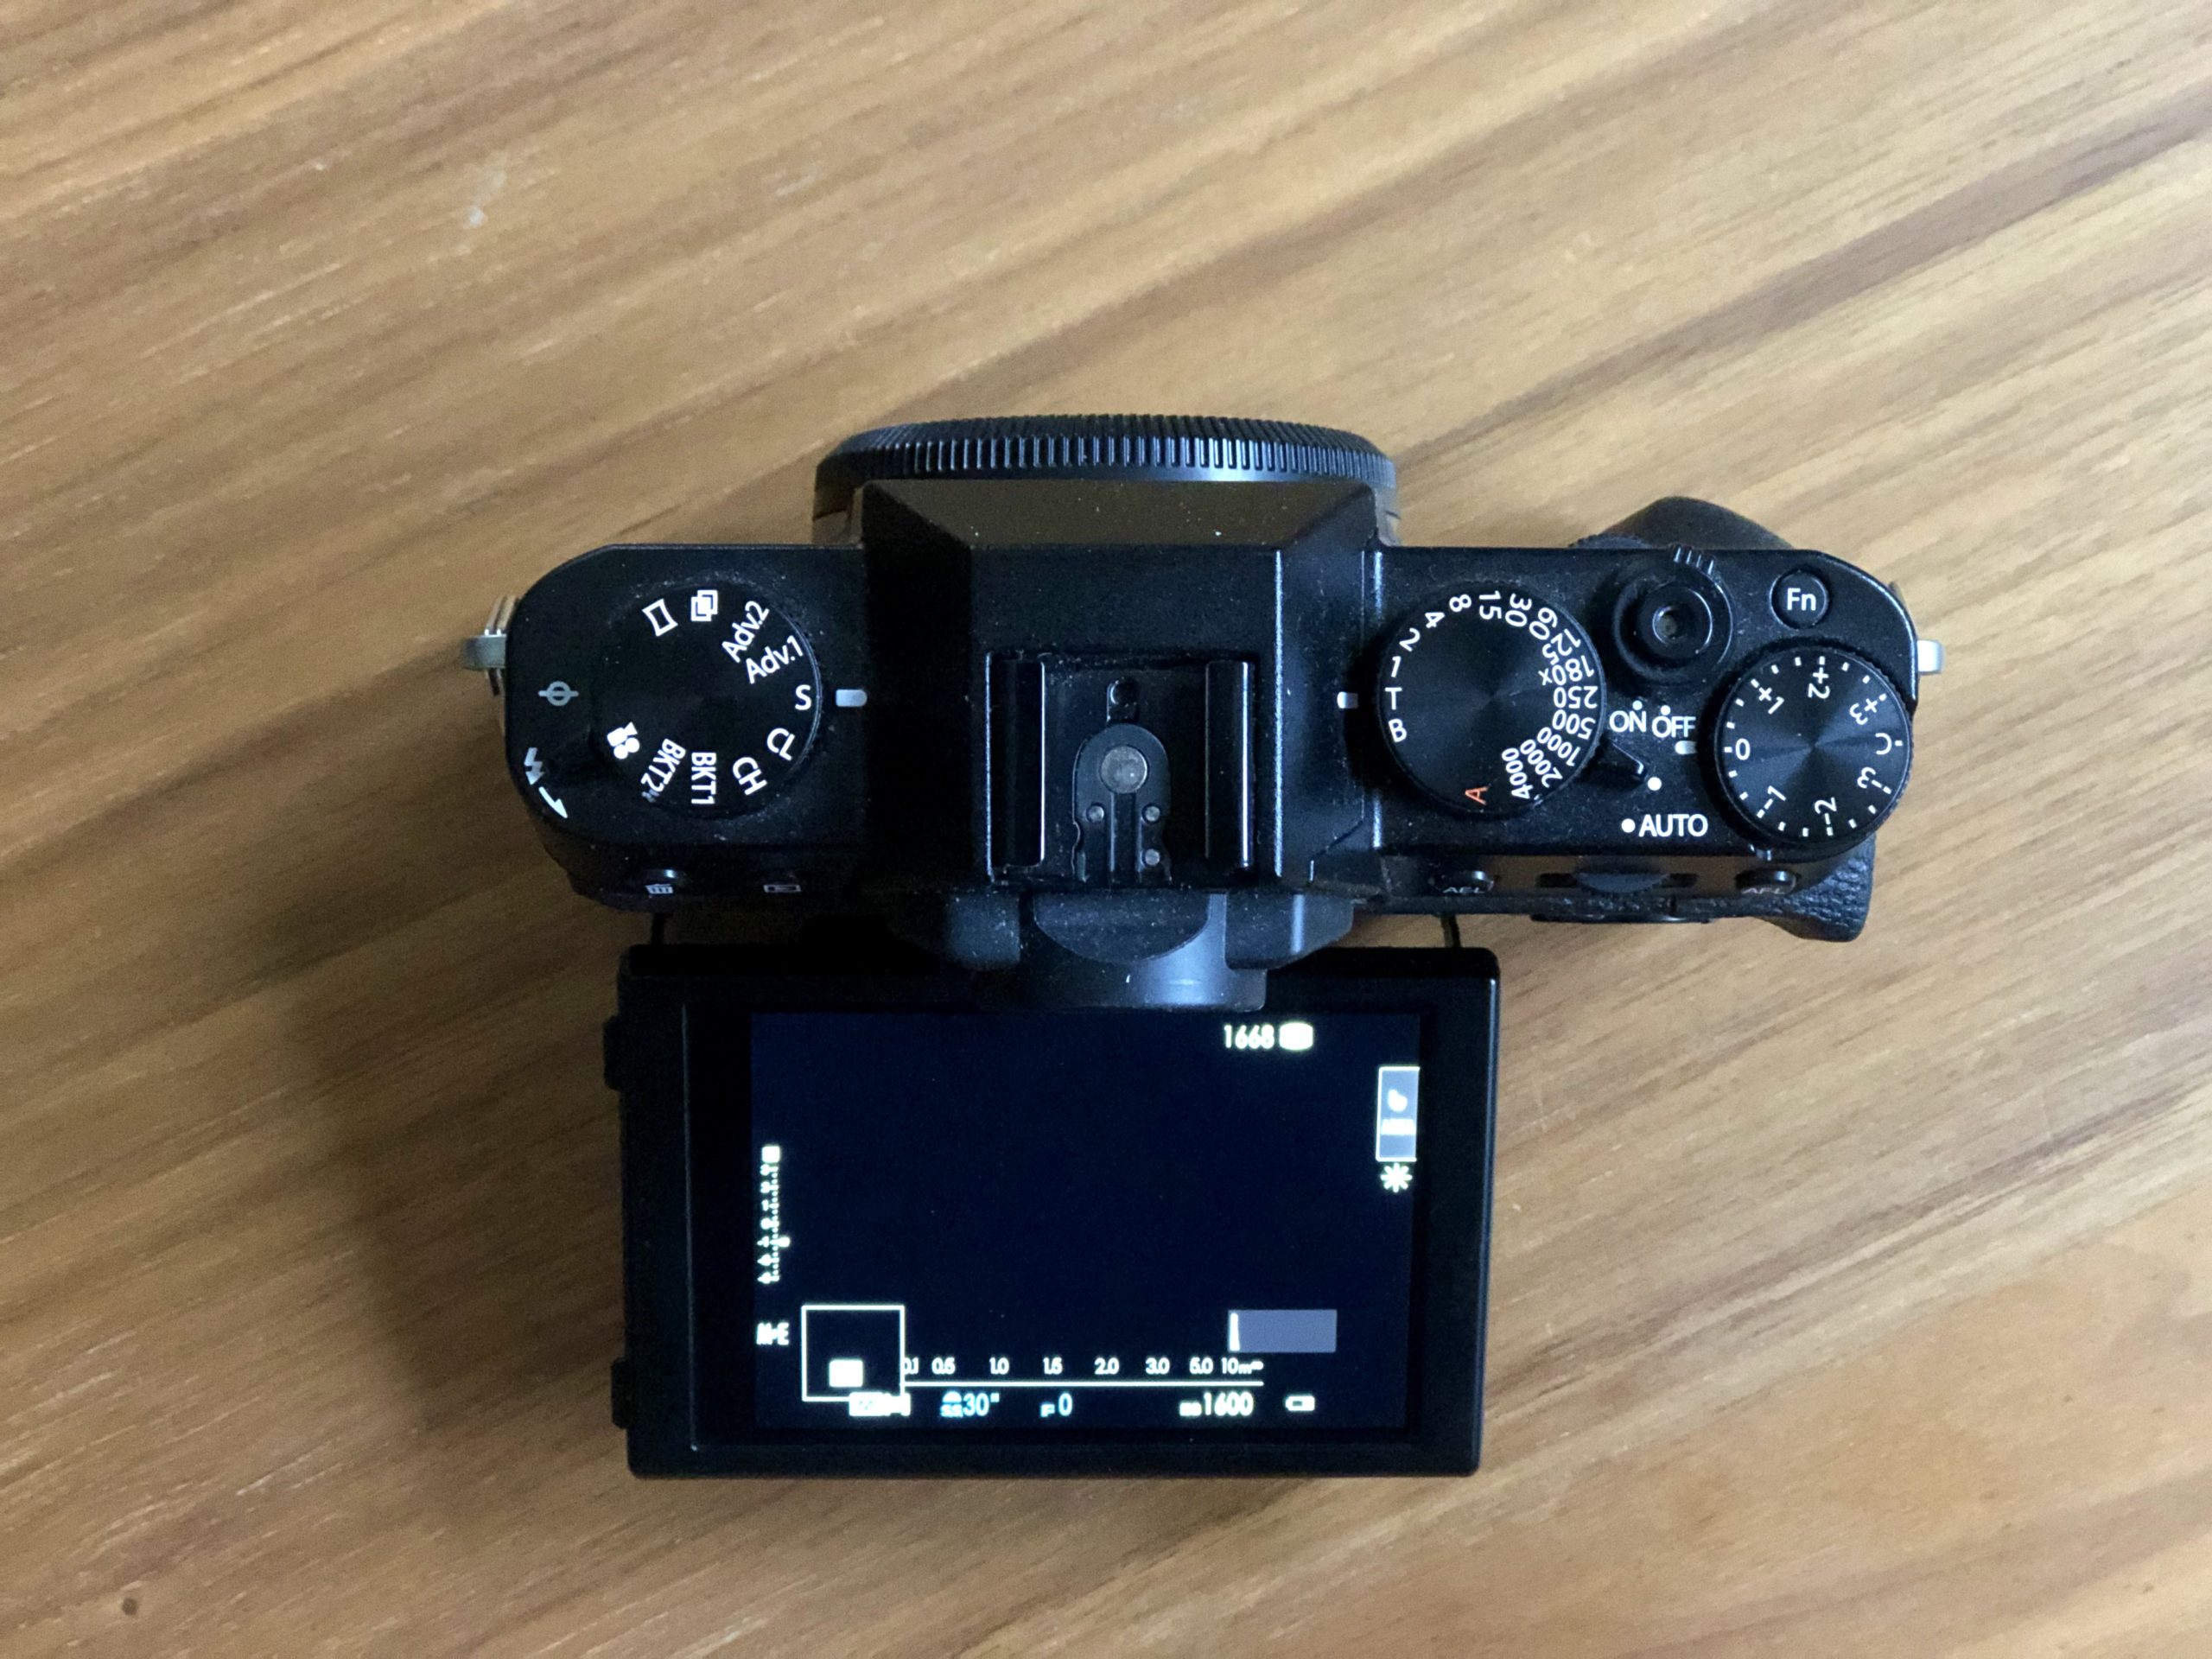 Fuji X-T20 ease of operating thanks to physical buttons and knobs